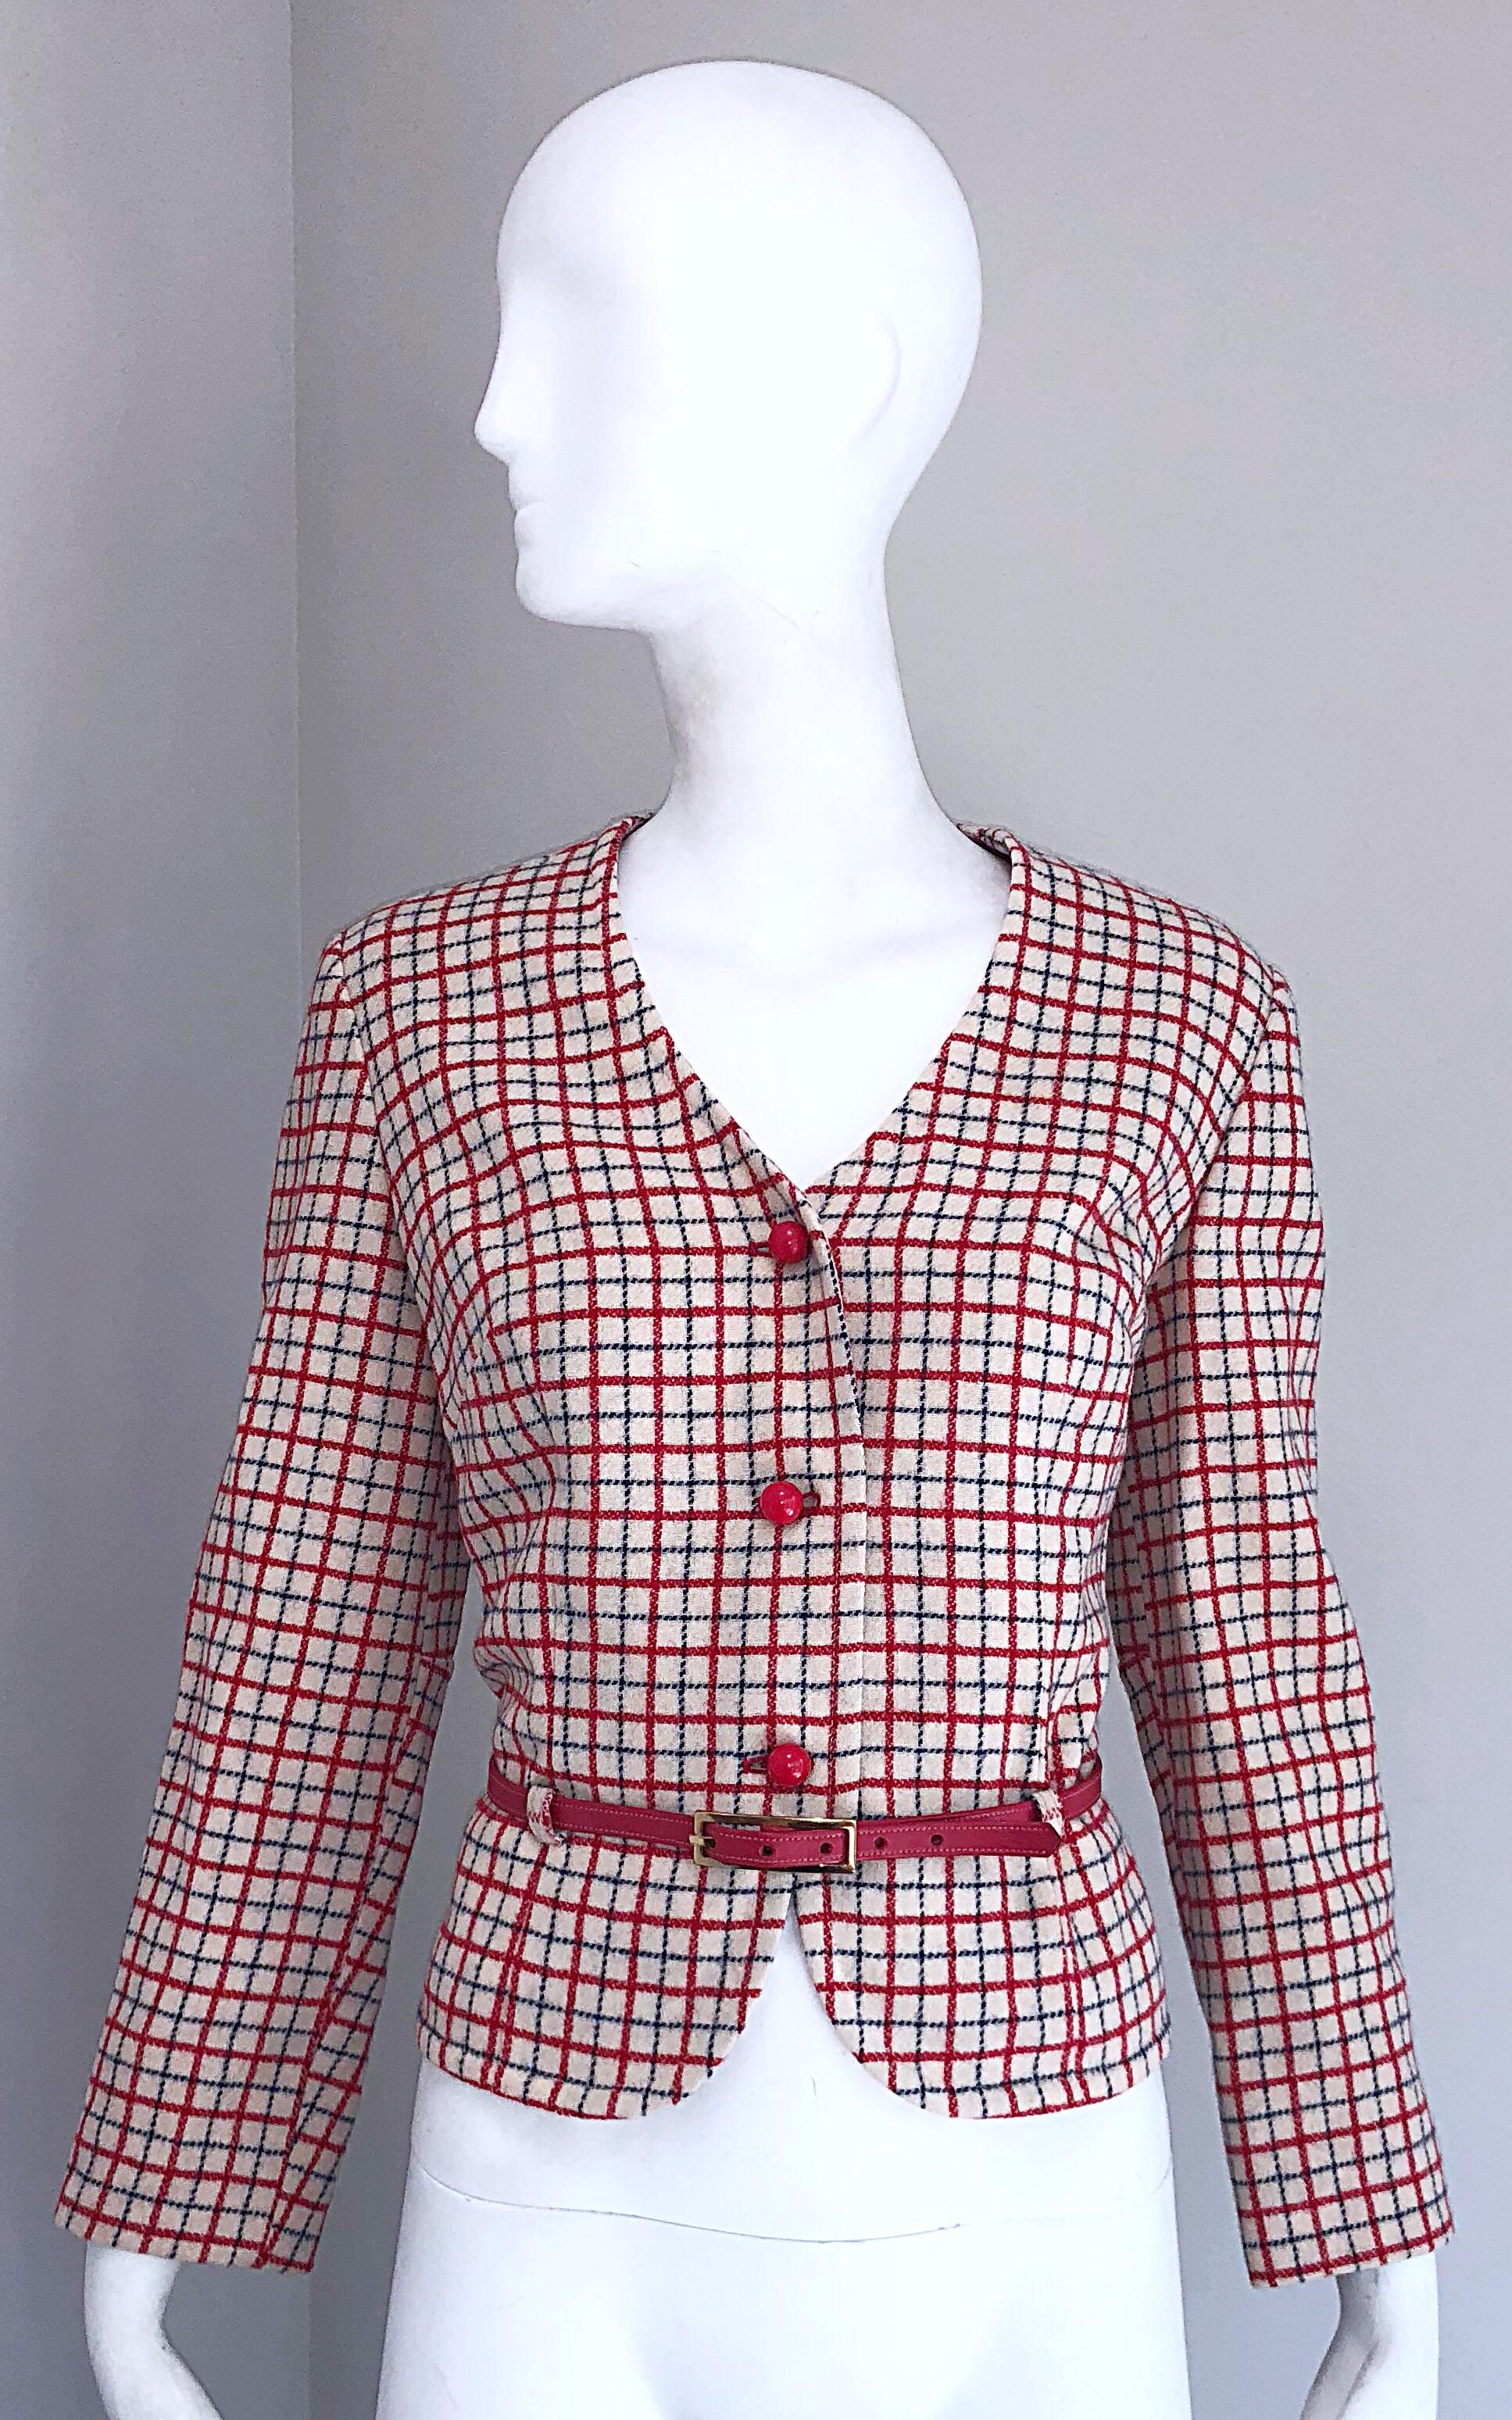 Chic 1960s PENDLETON red, white ( ivory ), and blue checkered wool belted nautical jacket! This rare gem features the finest wool one would expect from Pendleton. Original detachable red leather belt features the Pendleton signature on the back.